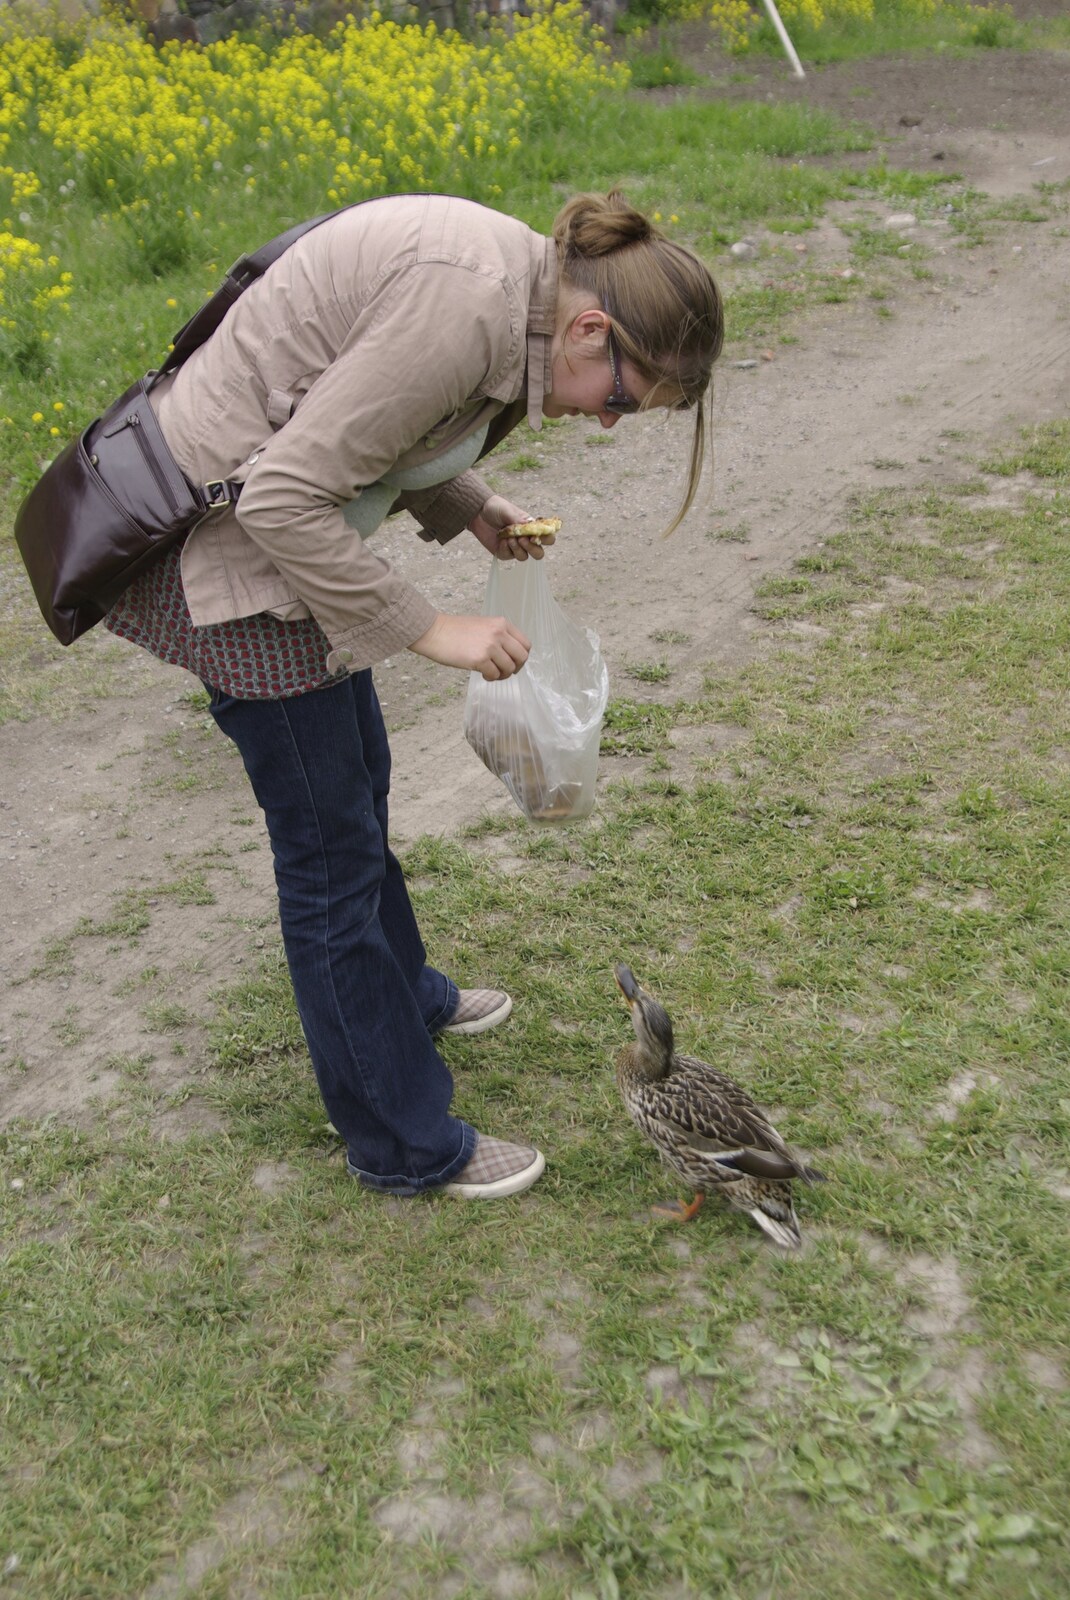 Genesis in Concert, and Suomenlinna, Helsinki, Finland - 11th June 2007: One of the ducks gets really keen